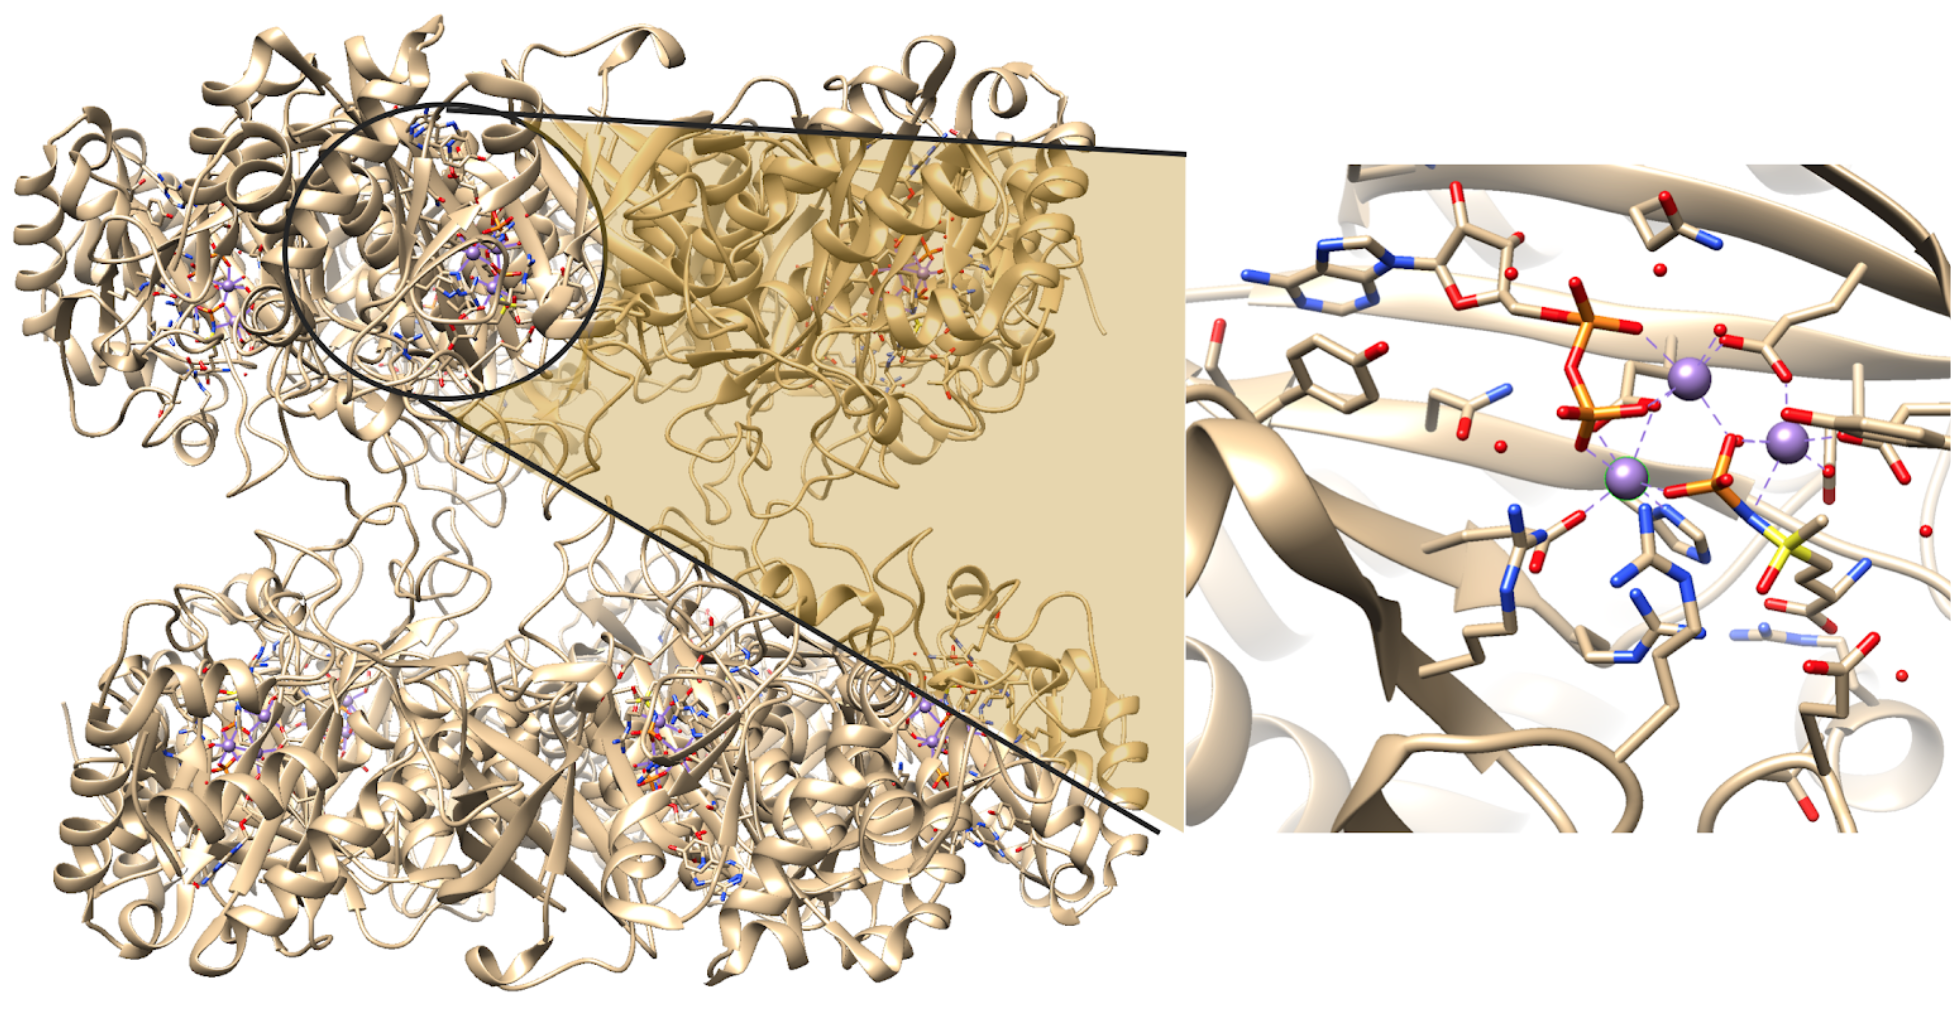 Close up view of the active site of human glutamate synthetase